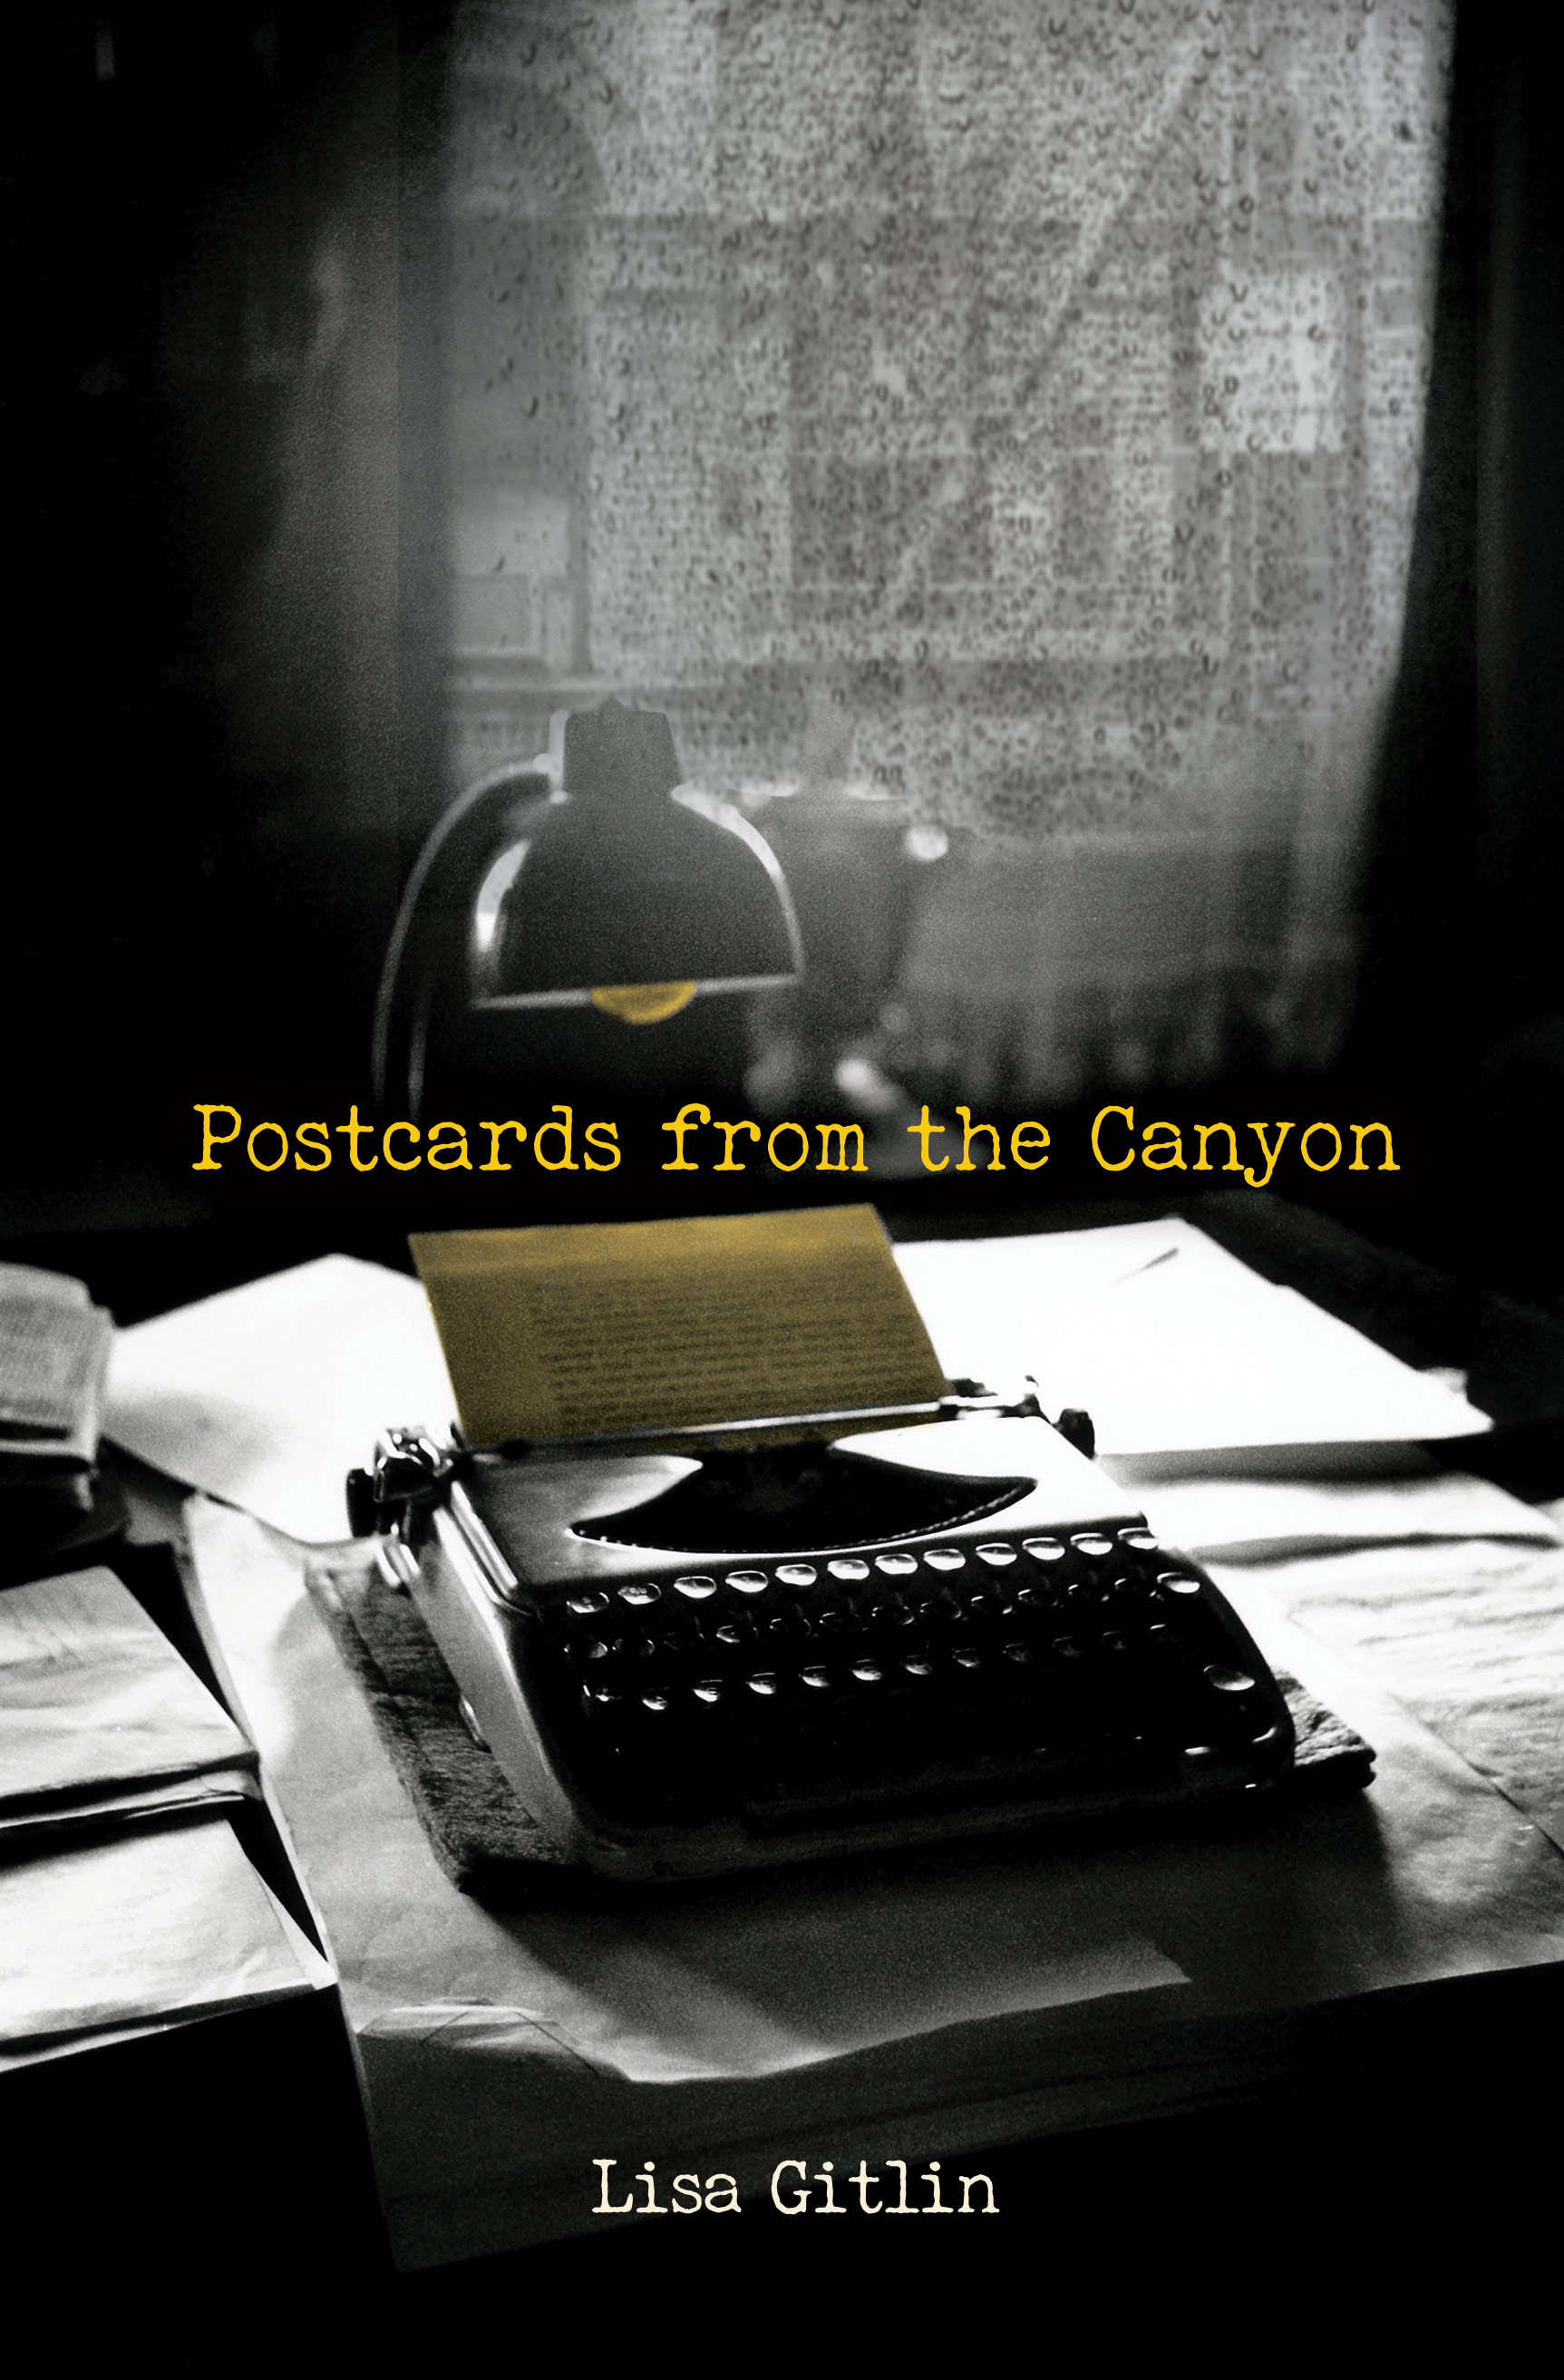 Postcards from the Canyon